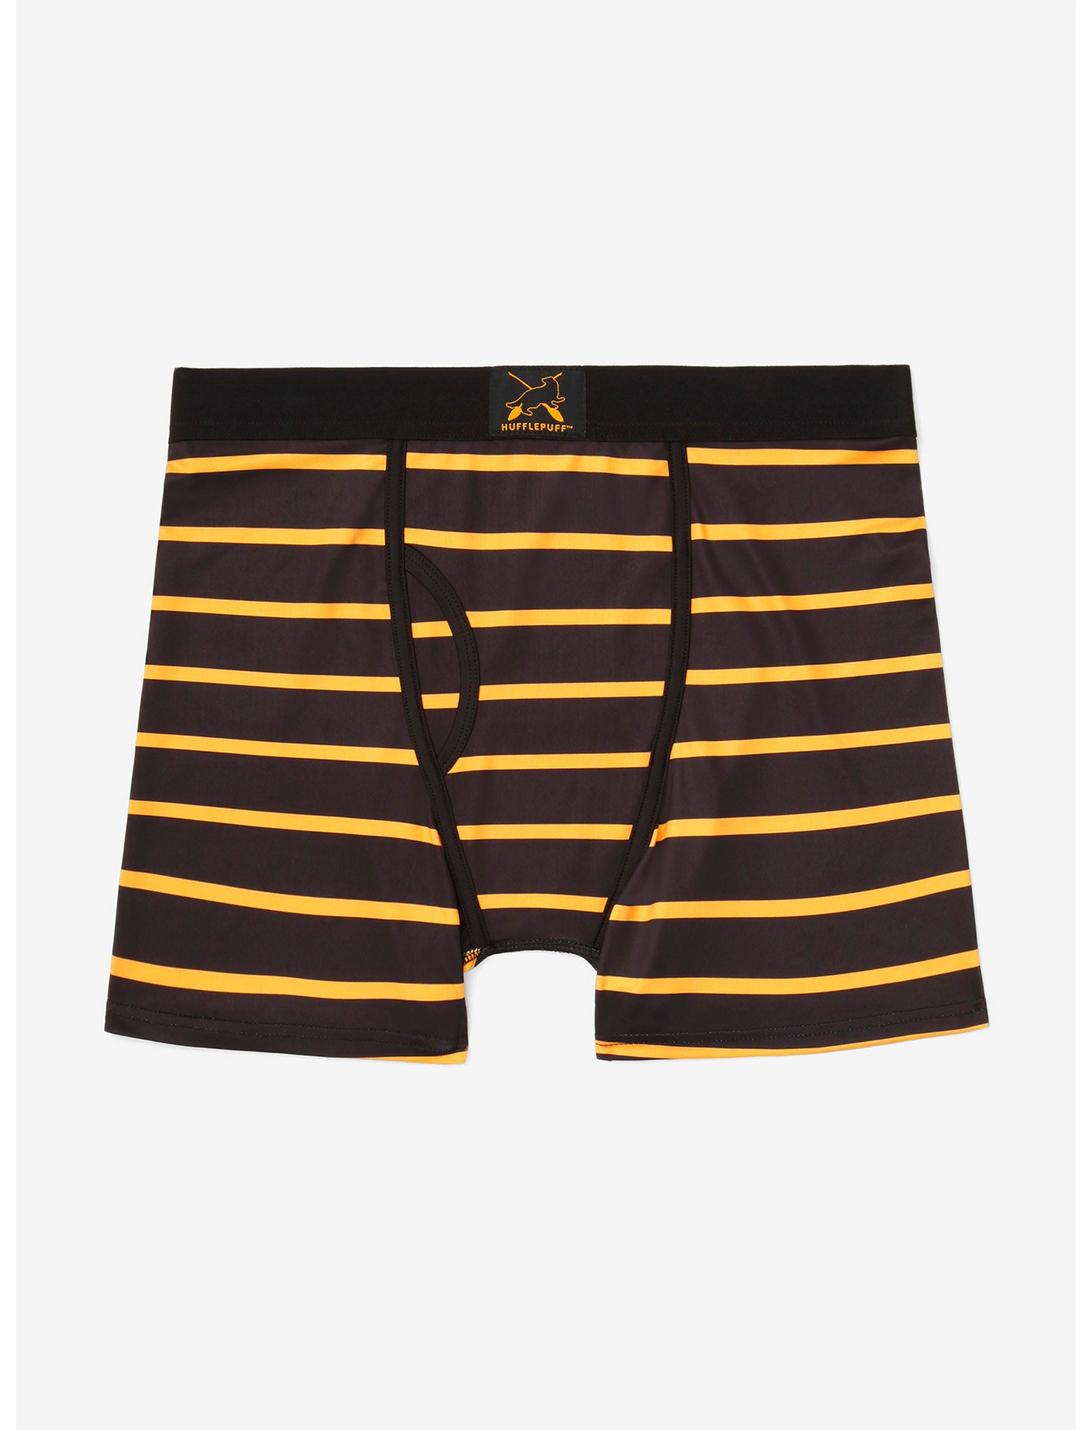 Harry Potter Hufflepuff Striped Boxer Briefs - BoxLunch Exclusive, BANANA YELLOW, hi-res